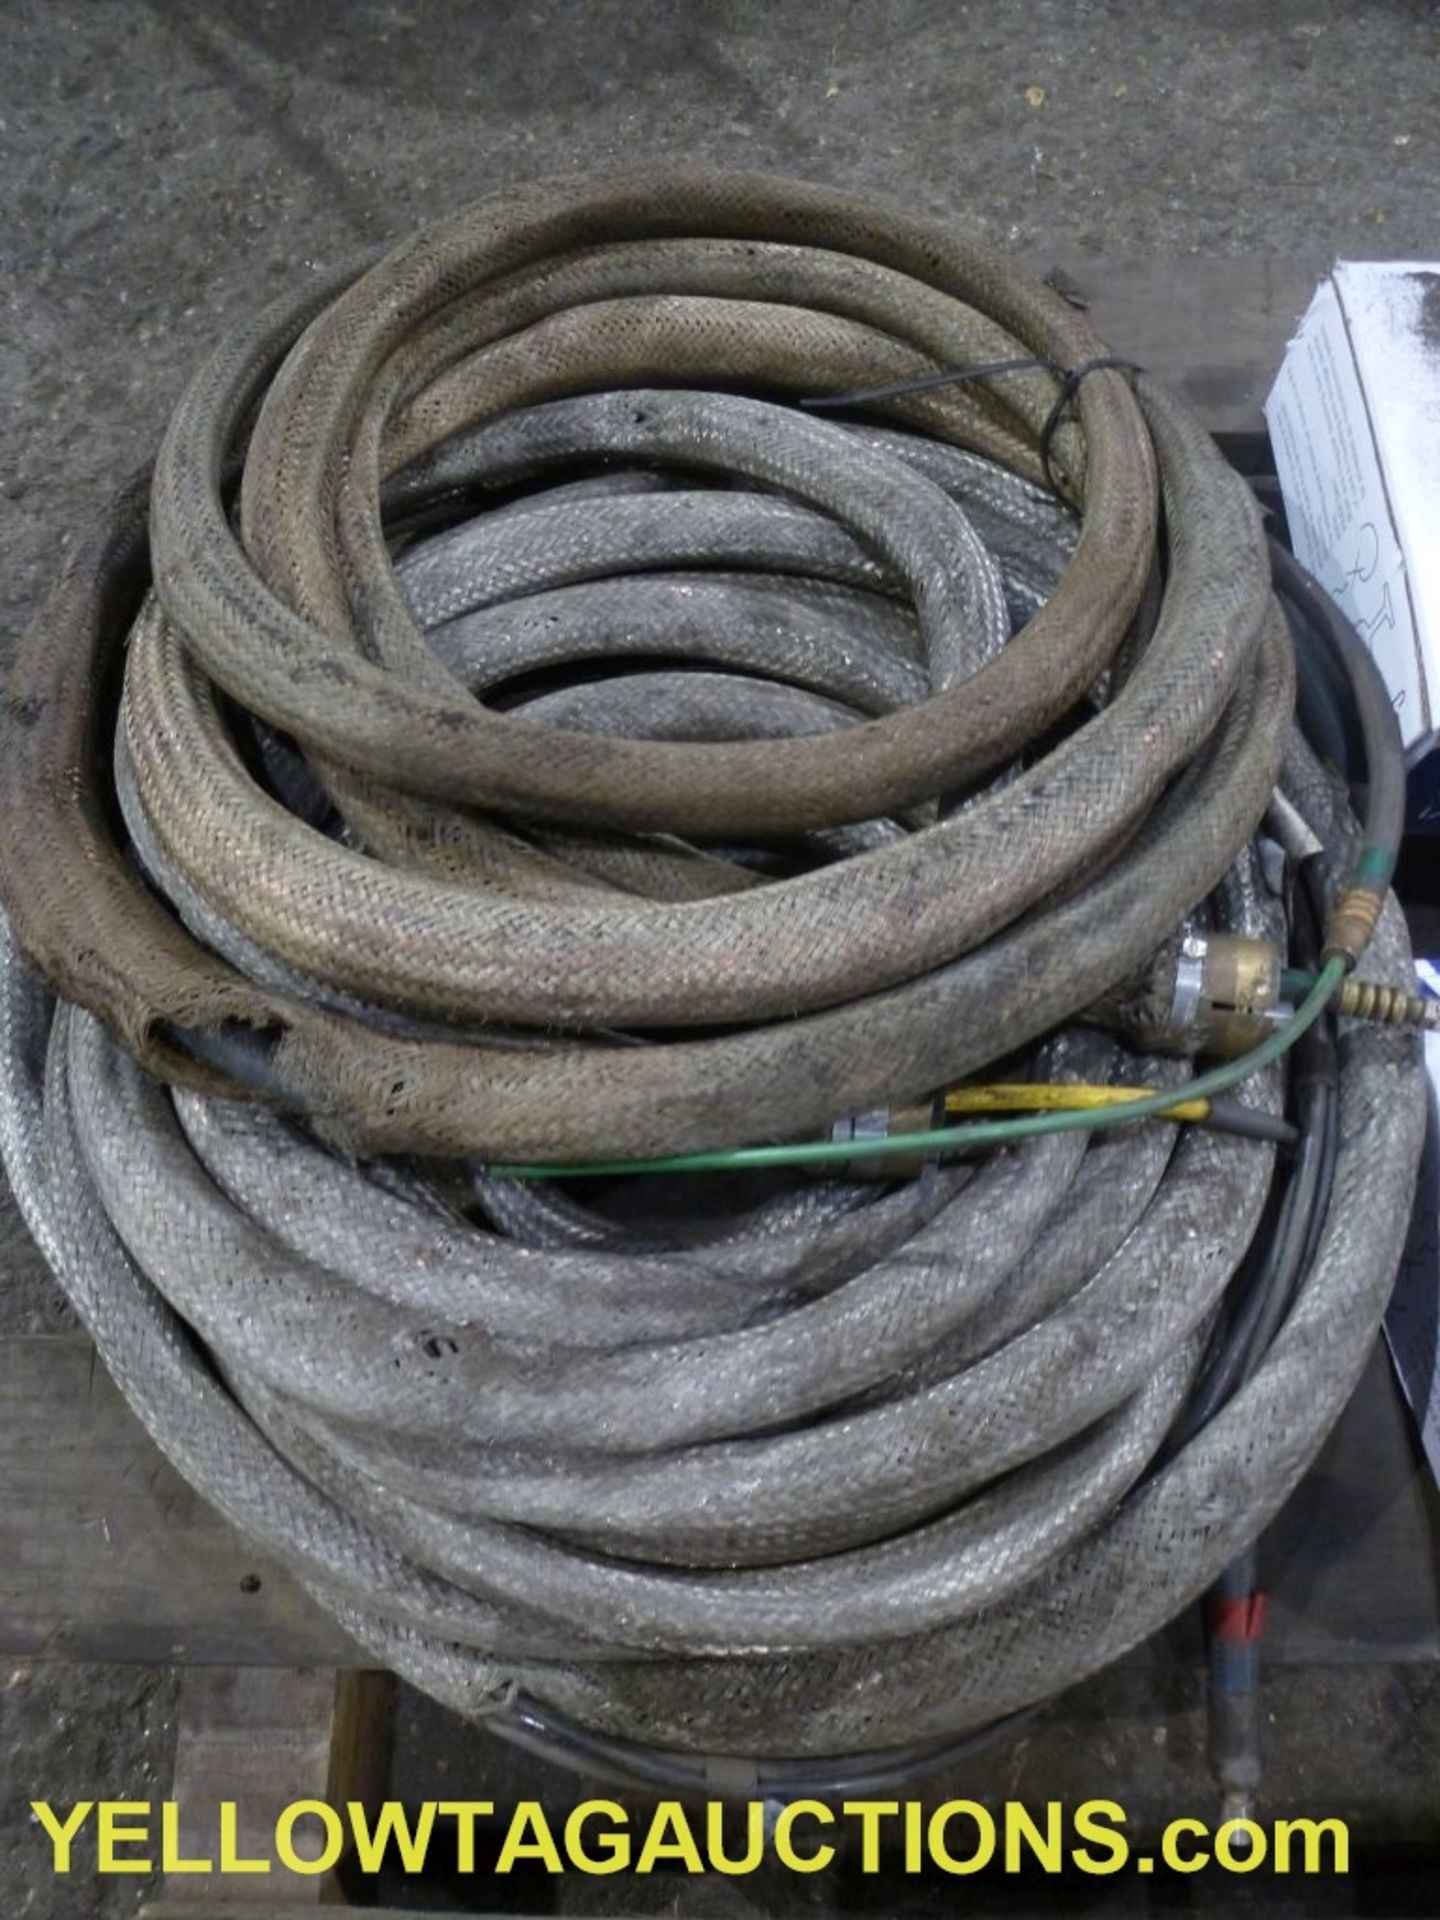 Lot of Assorted Wire and Hose|(2) Boxes of Solid Steel Wires, Gas Metal Arc Welding Wire, Size 0. - Image 5 of 6